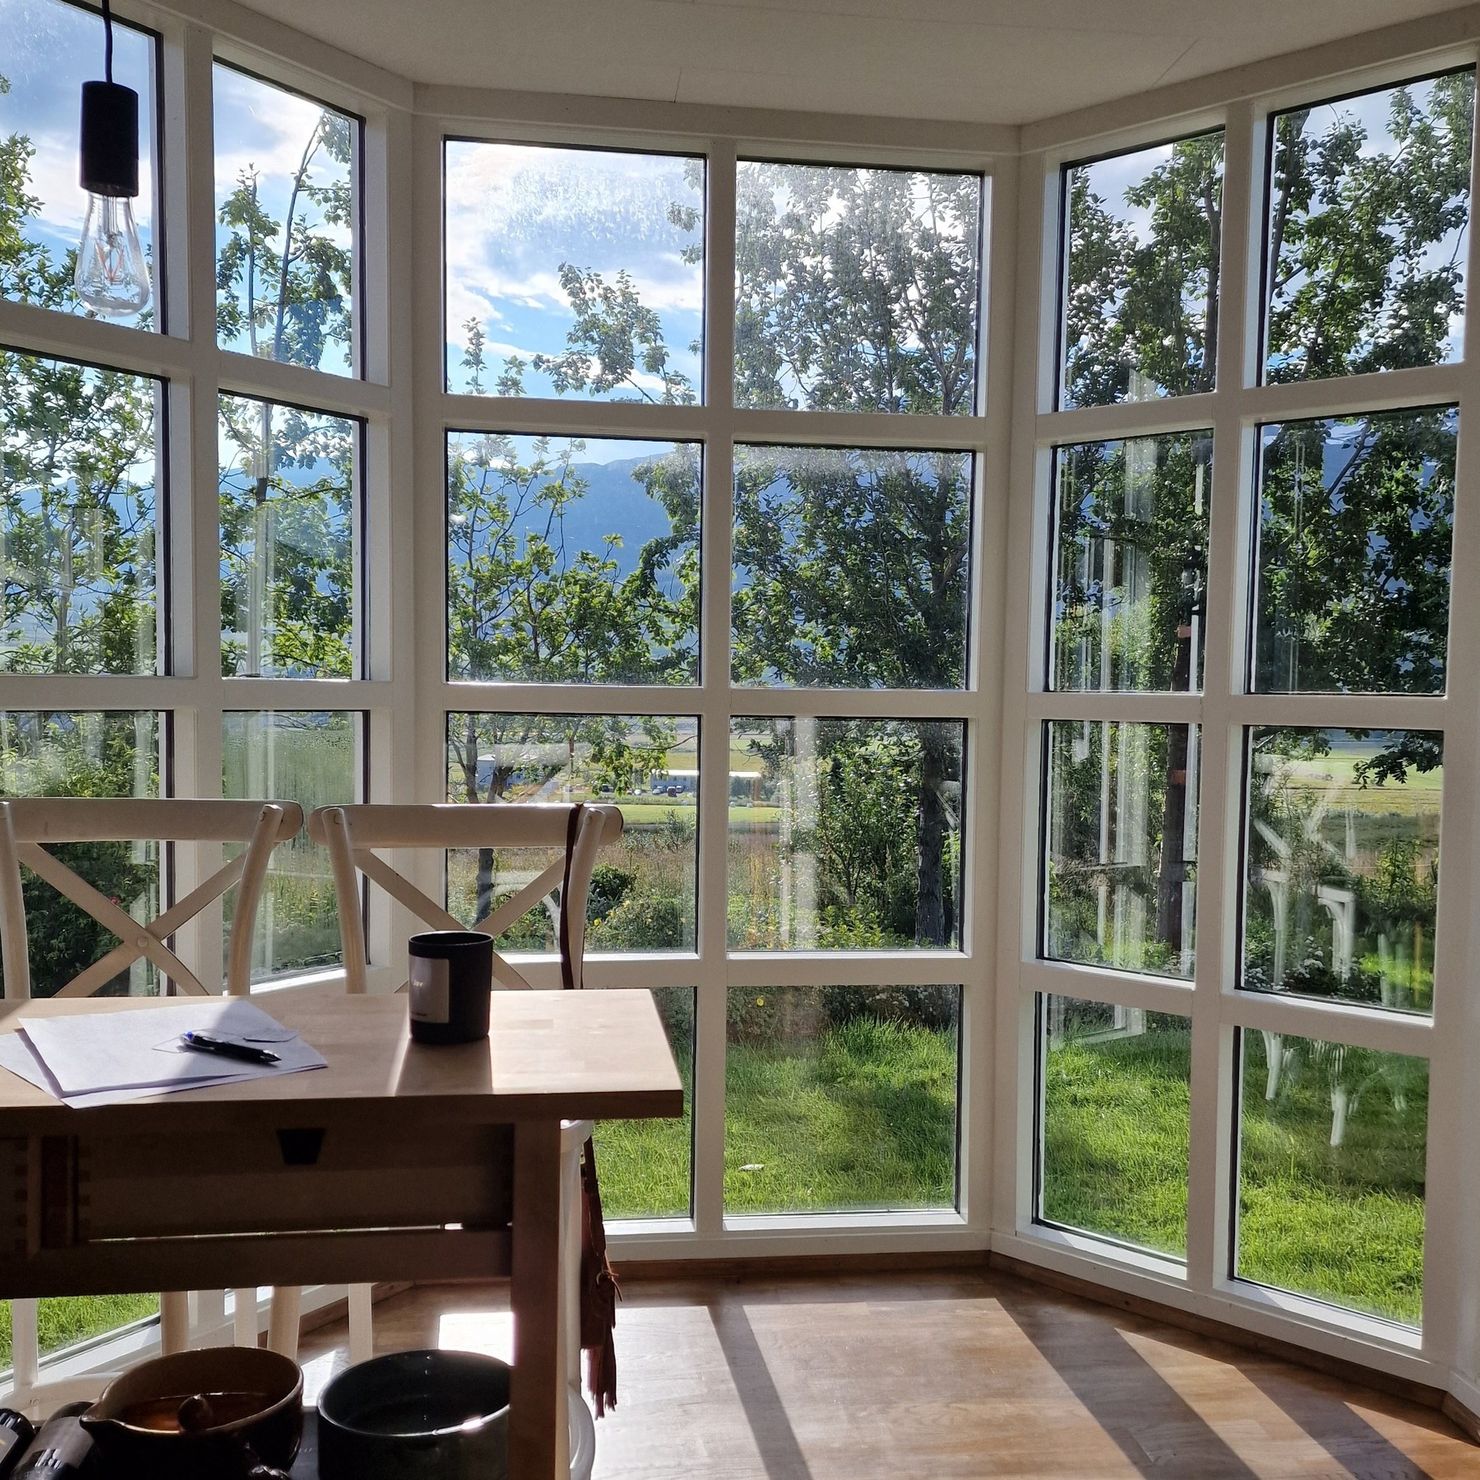 Large panoramic windows open the view from the living area to the countryside